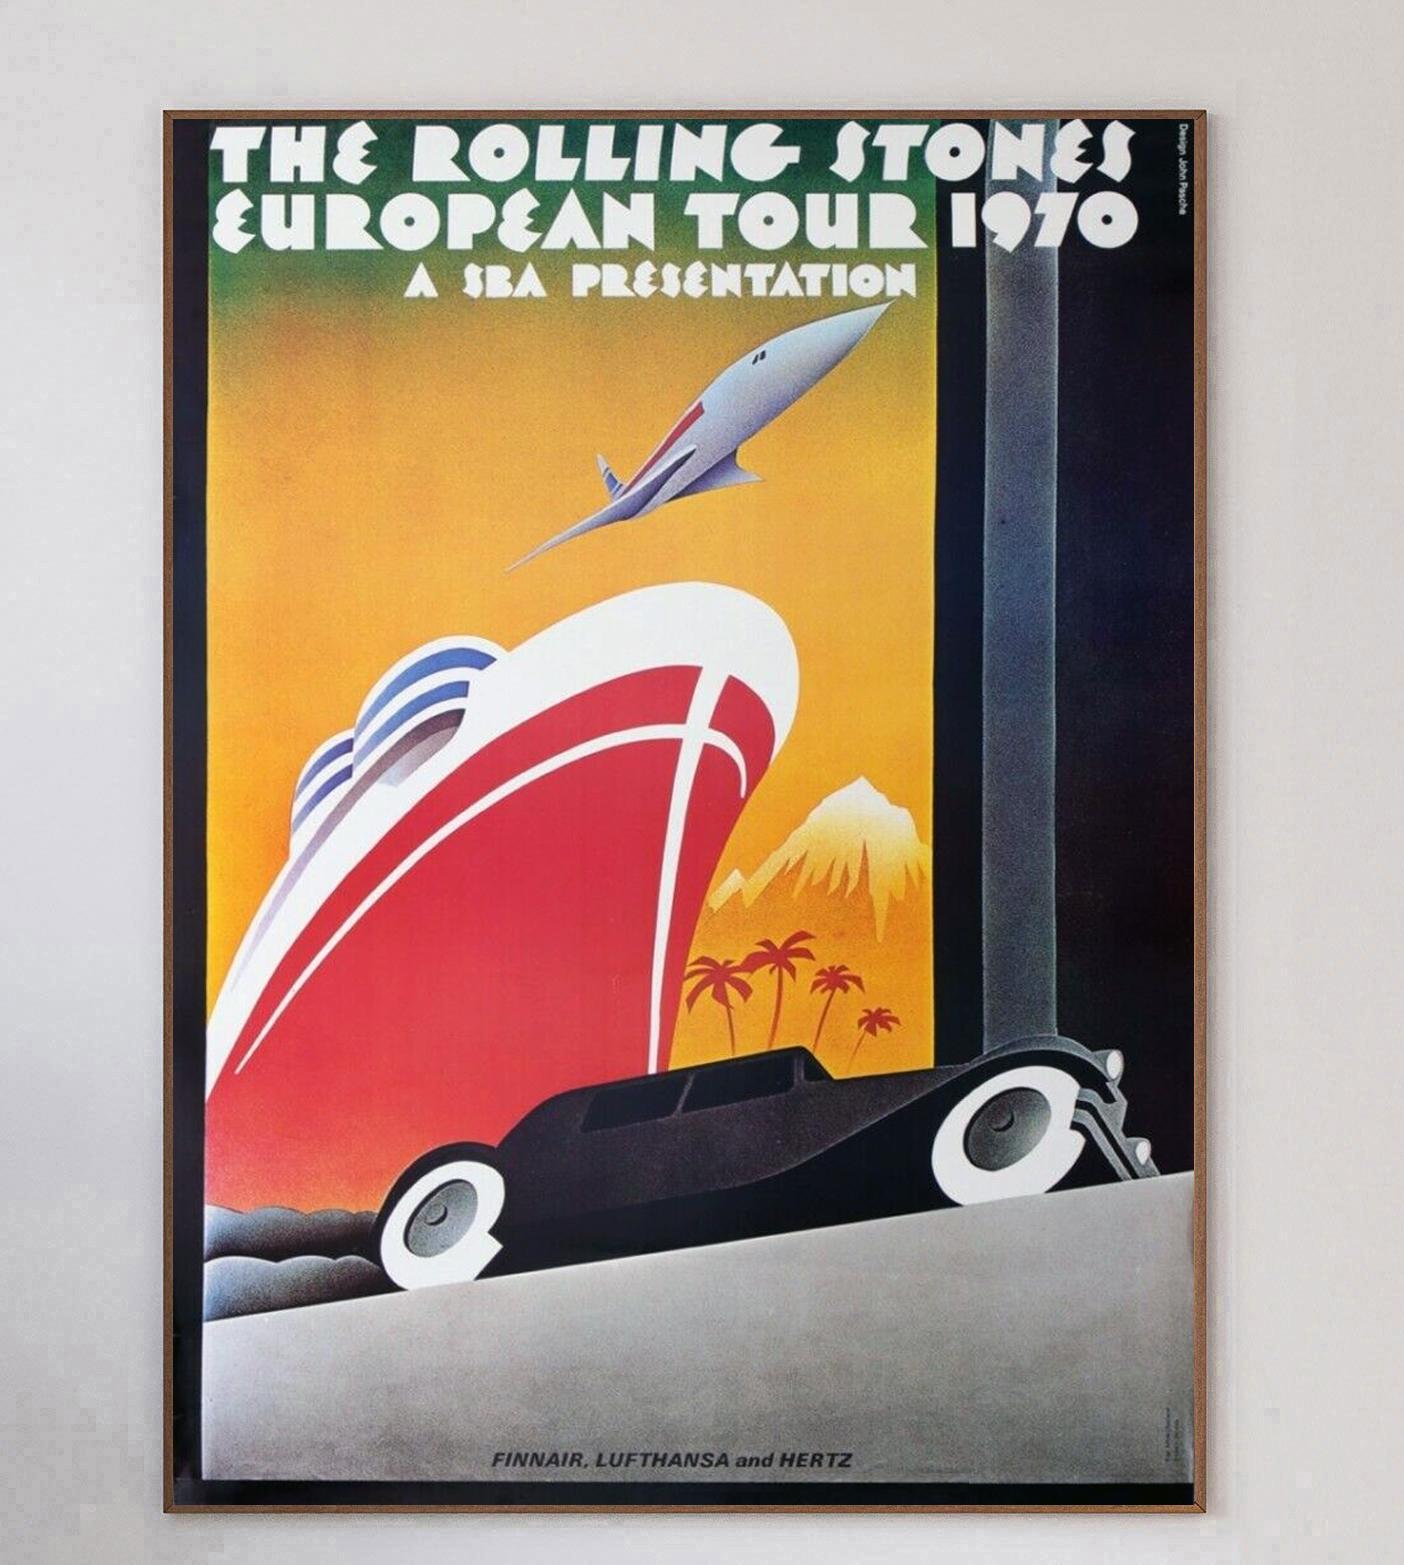 The Rolling Stones 1970 European Tour ran from late summer to early autumn 1970 and saw the band playing in support of their latest album, 1969's 